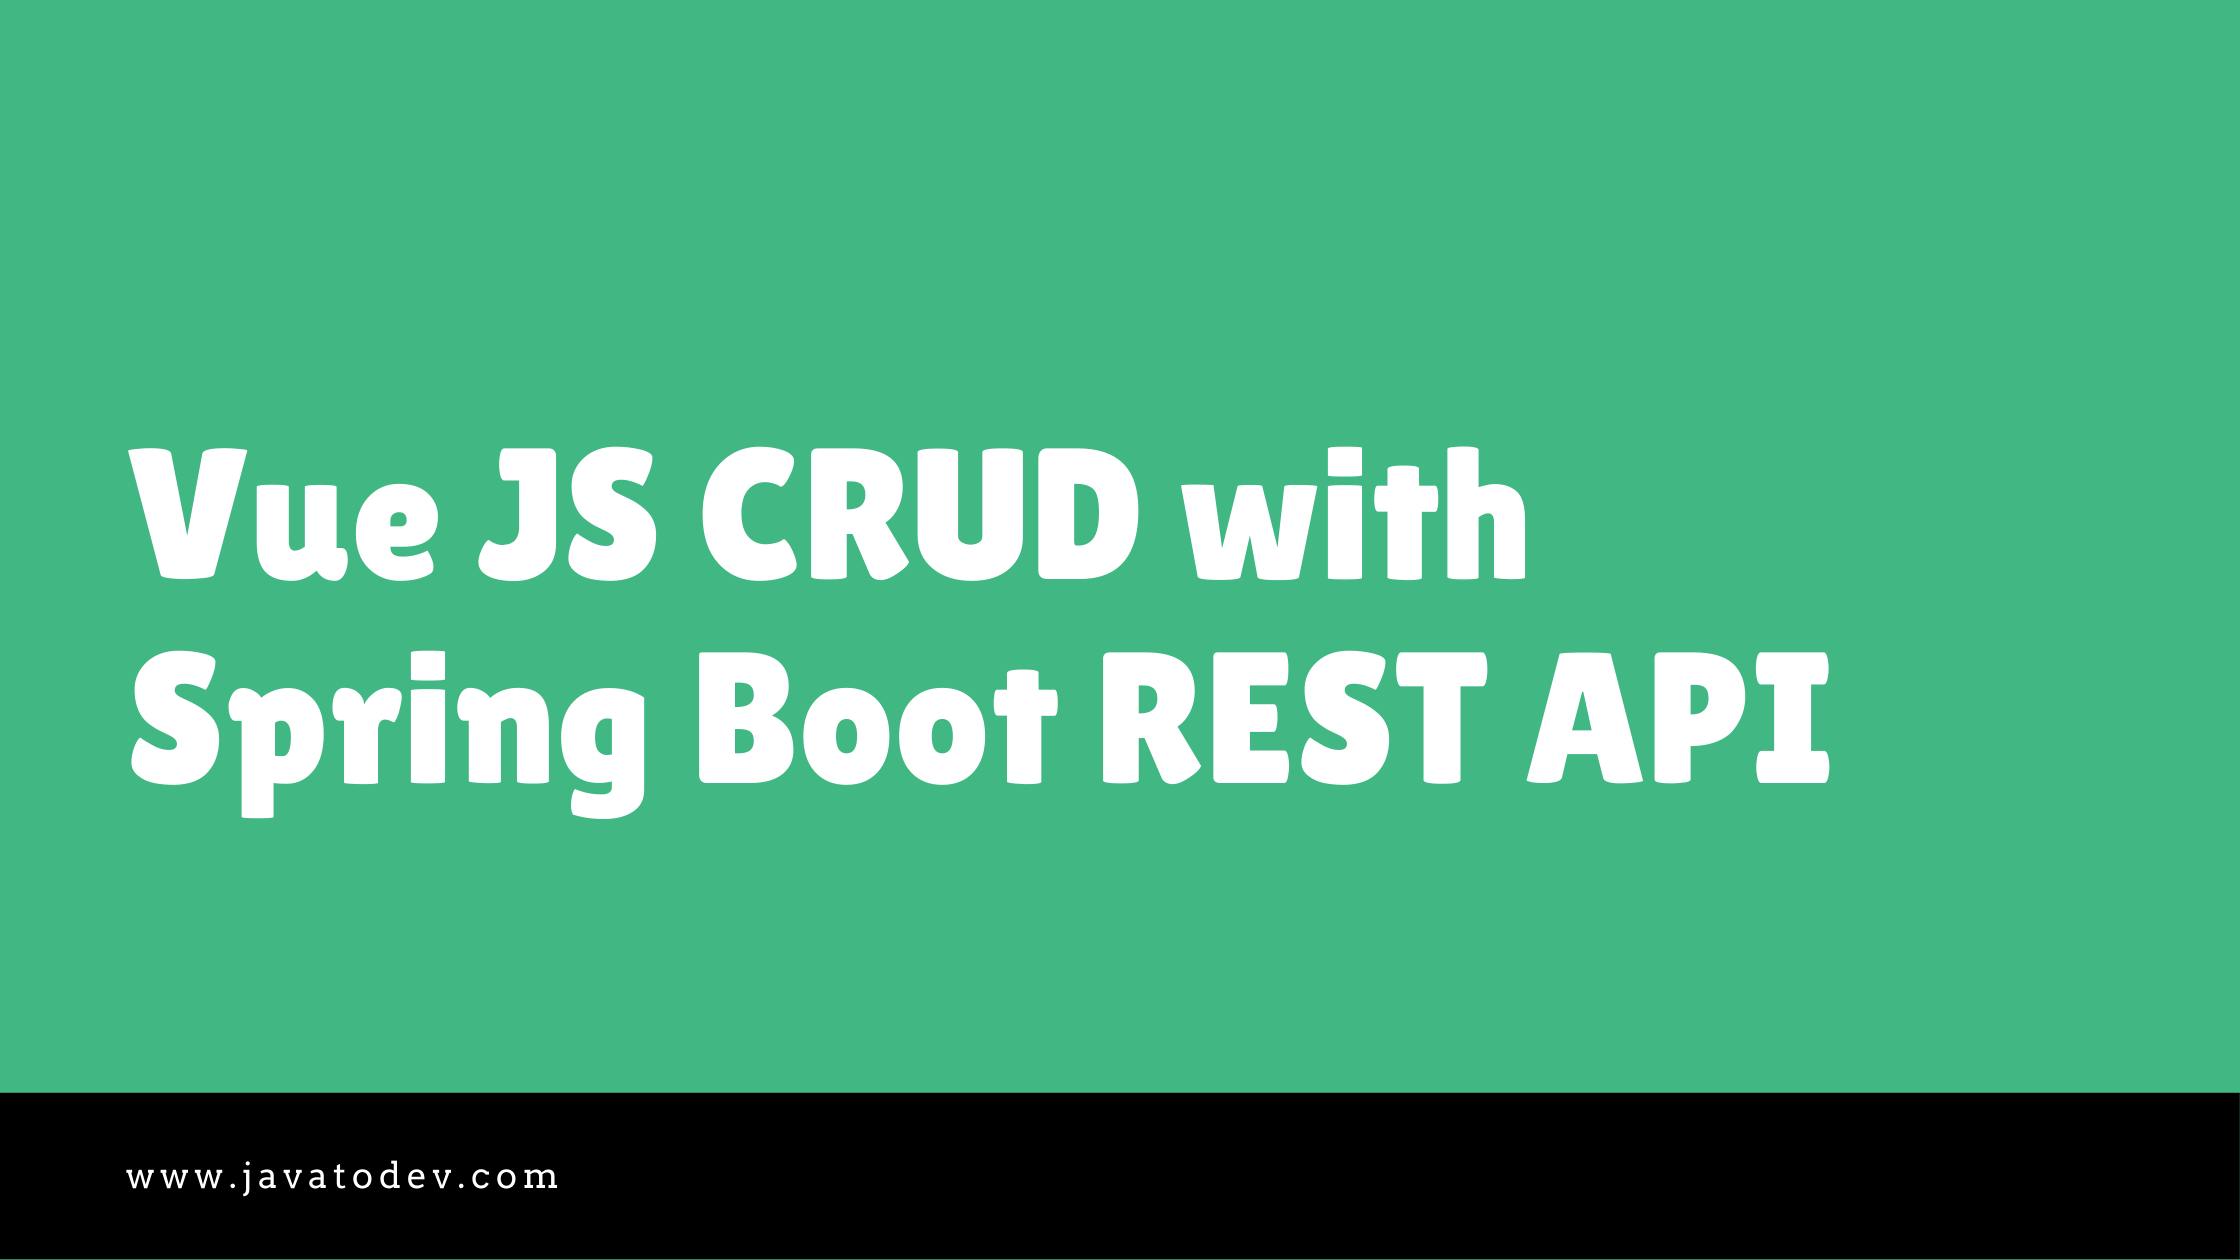 How to Develop Vue JS CRUD with Vuetify, Axios, Spring Boot REST API